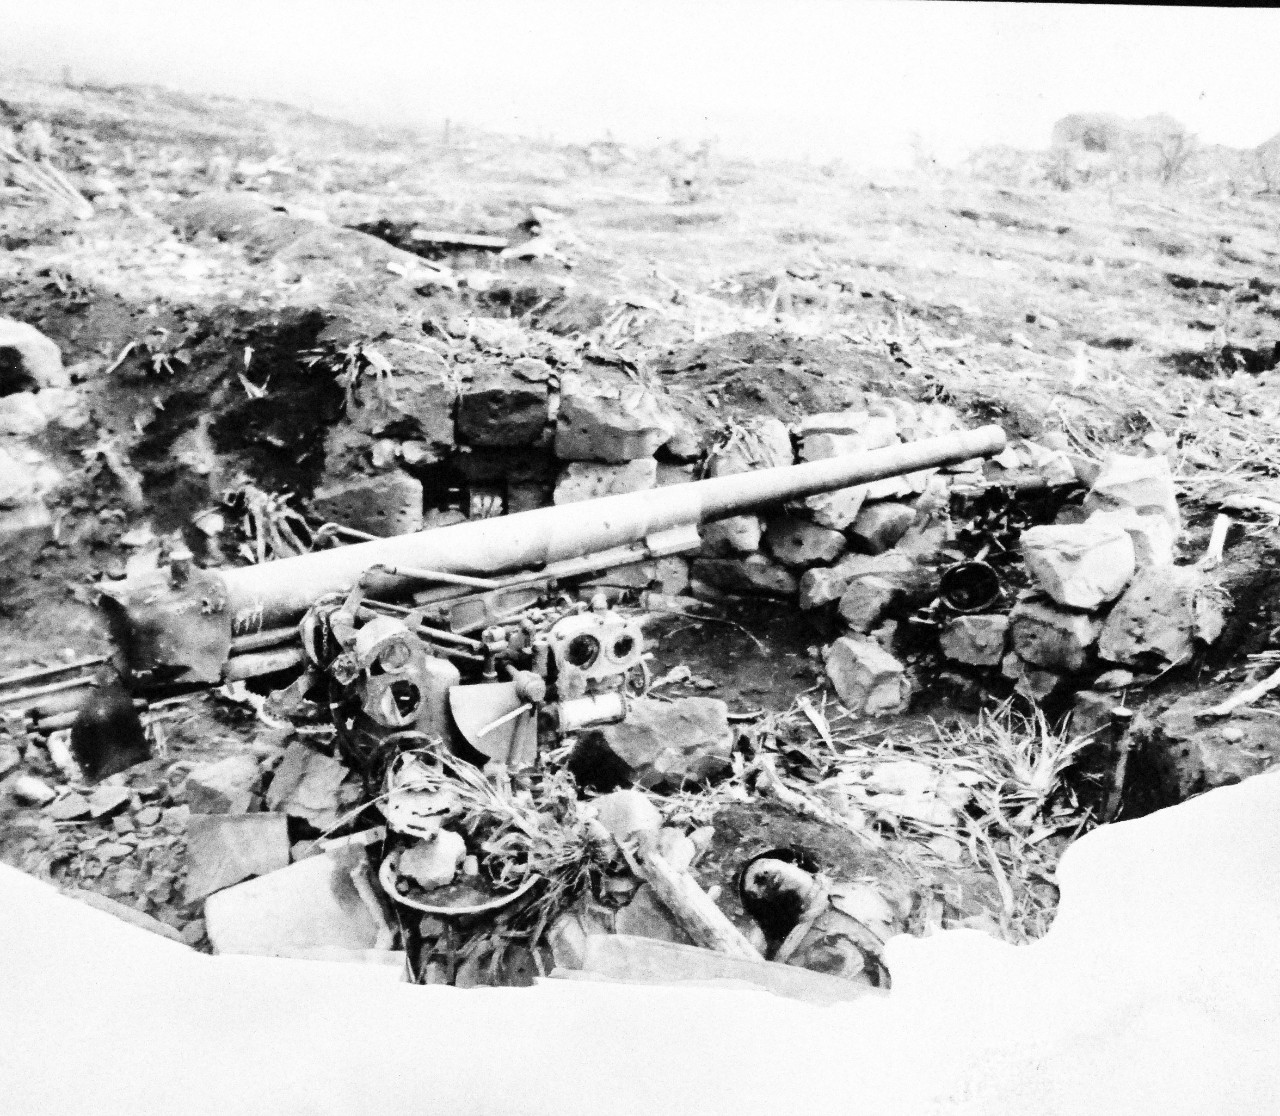 127-GW-304-143217:  Battle for Iwo Jima, February-March 1945.   Japanese 75mm anti-aircraft gun, model 88.   Photographed by Ragus, March 1945.  Official U.S. Marine Corps photograph, now in the collections of the National Archives.  (2016/02/17).   This photograph is damaged. 